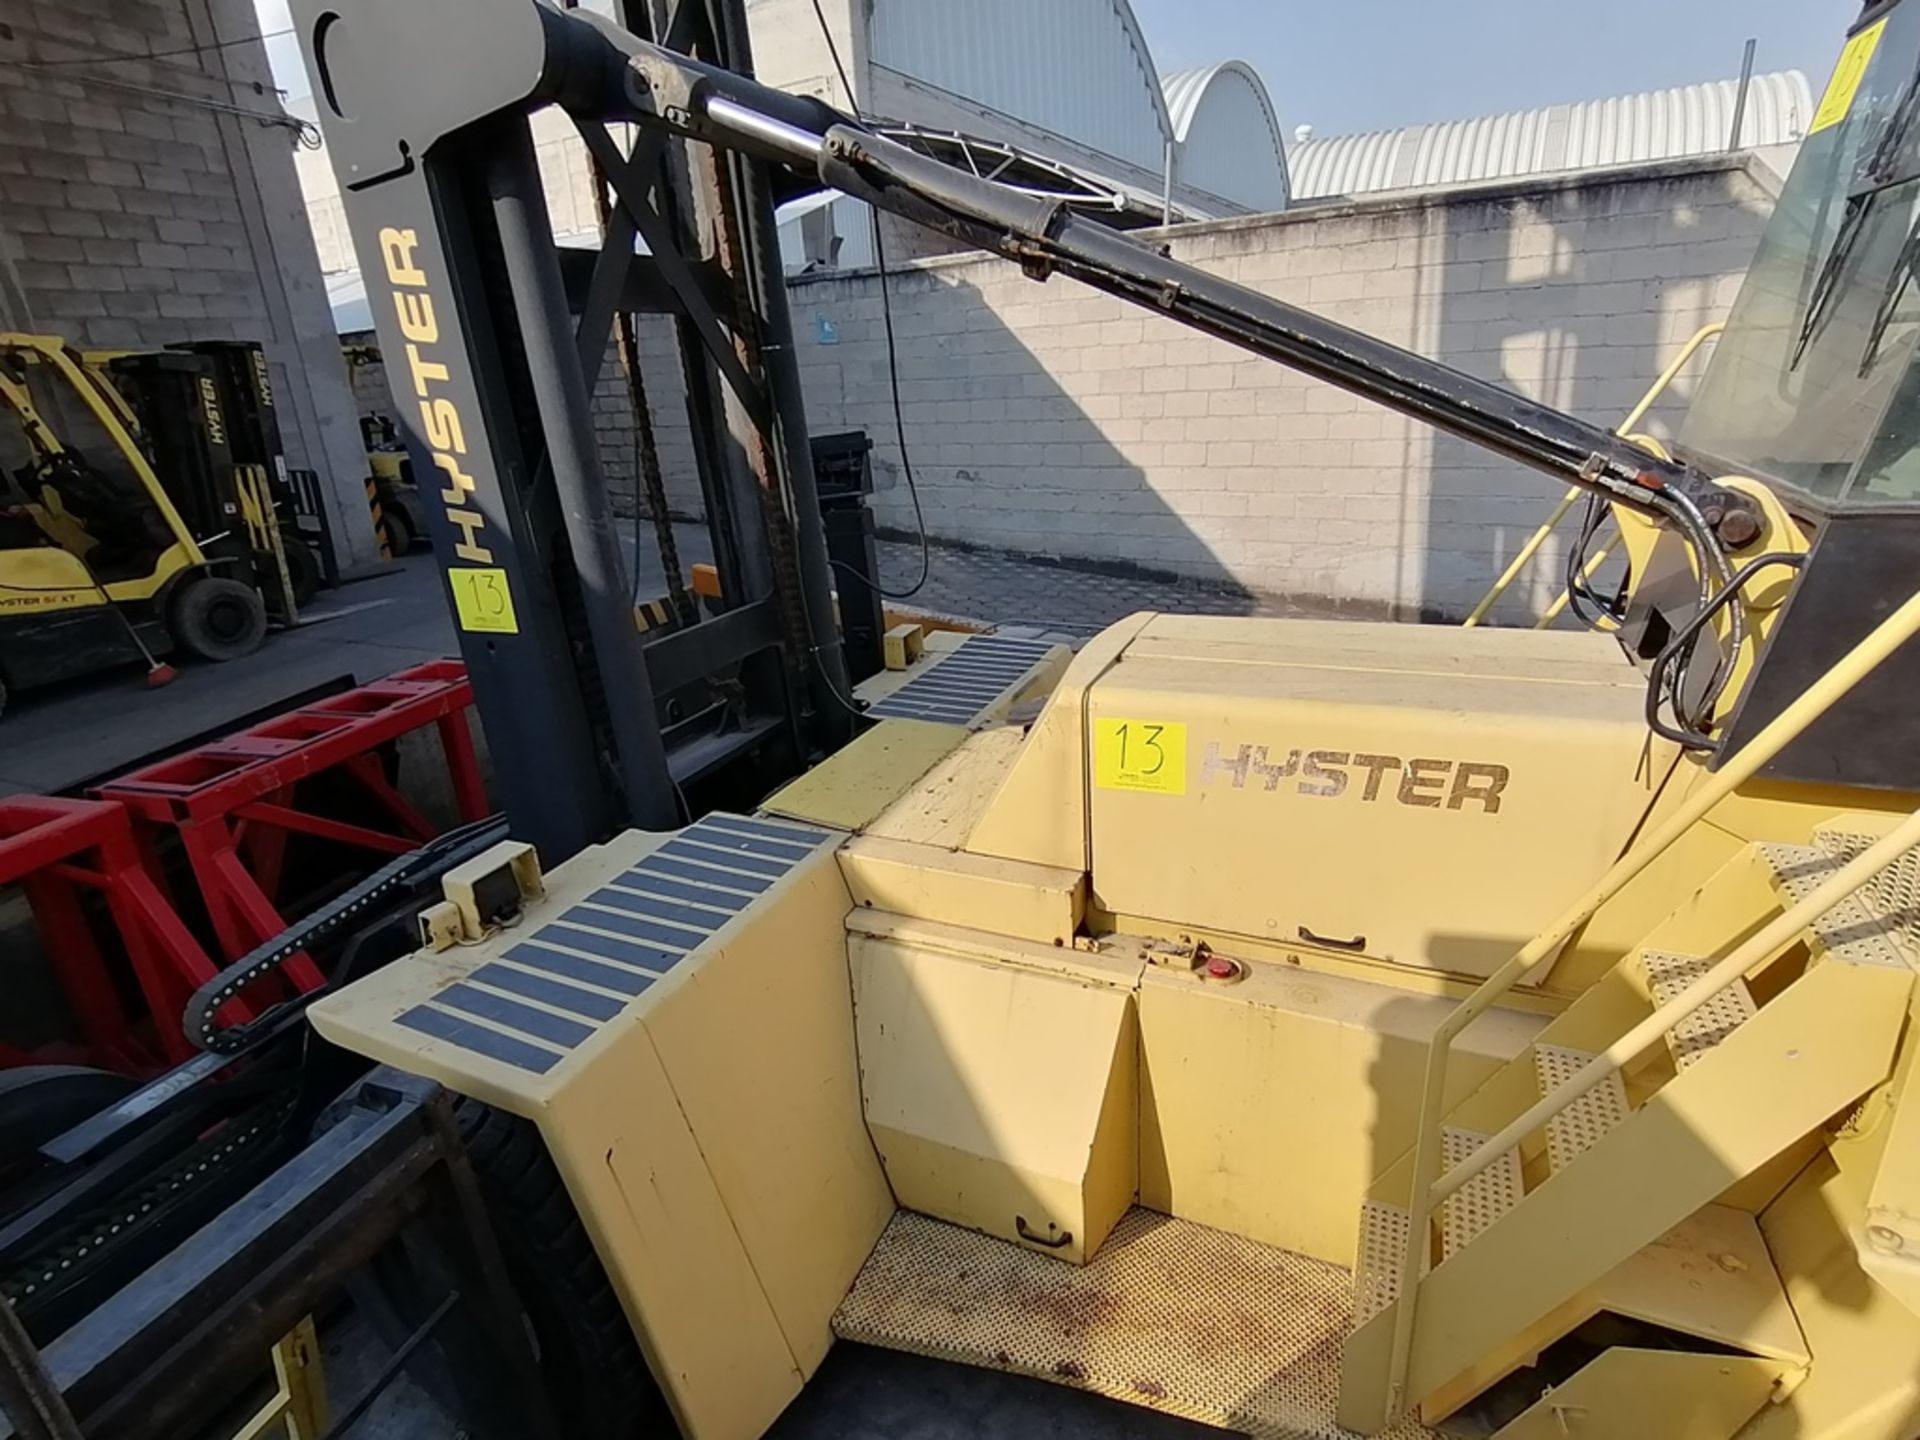 2003 Hyster Container handler, model H400H-ECH, 8,700 lb capacity - Image 23 of 60